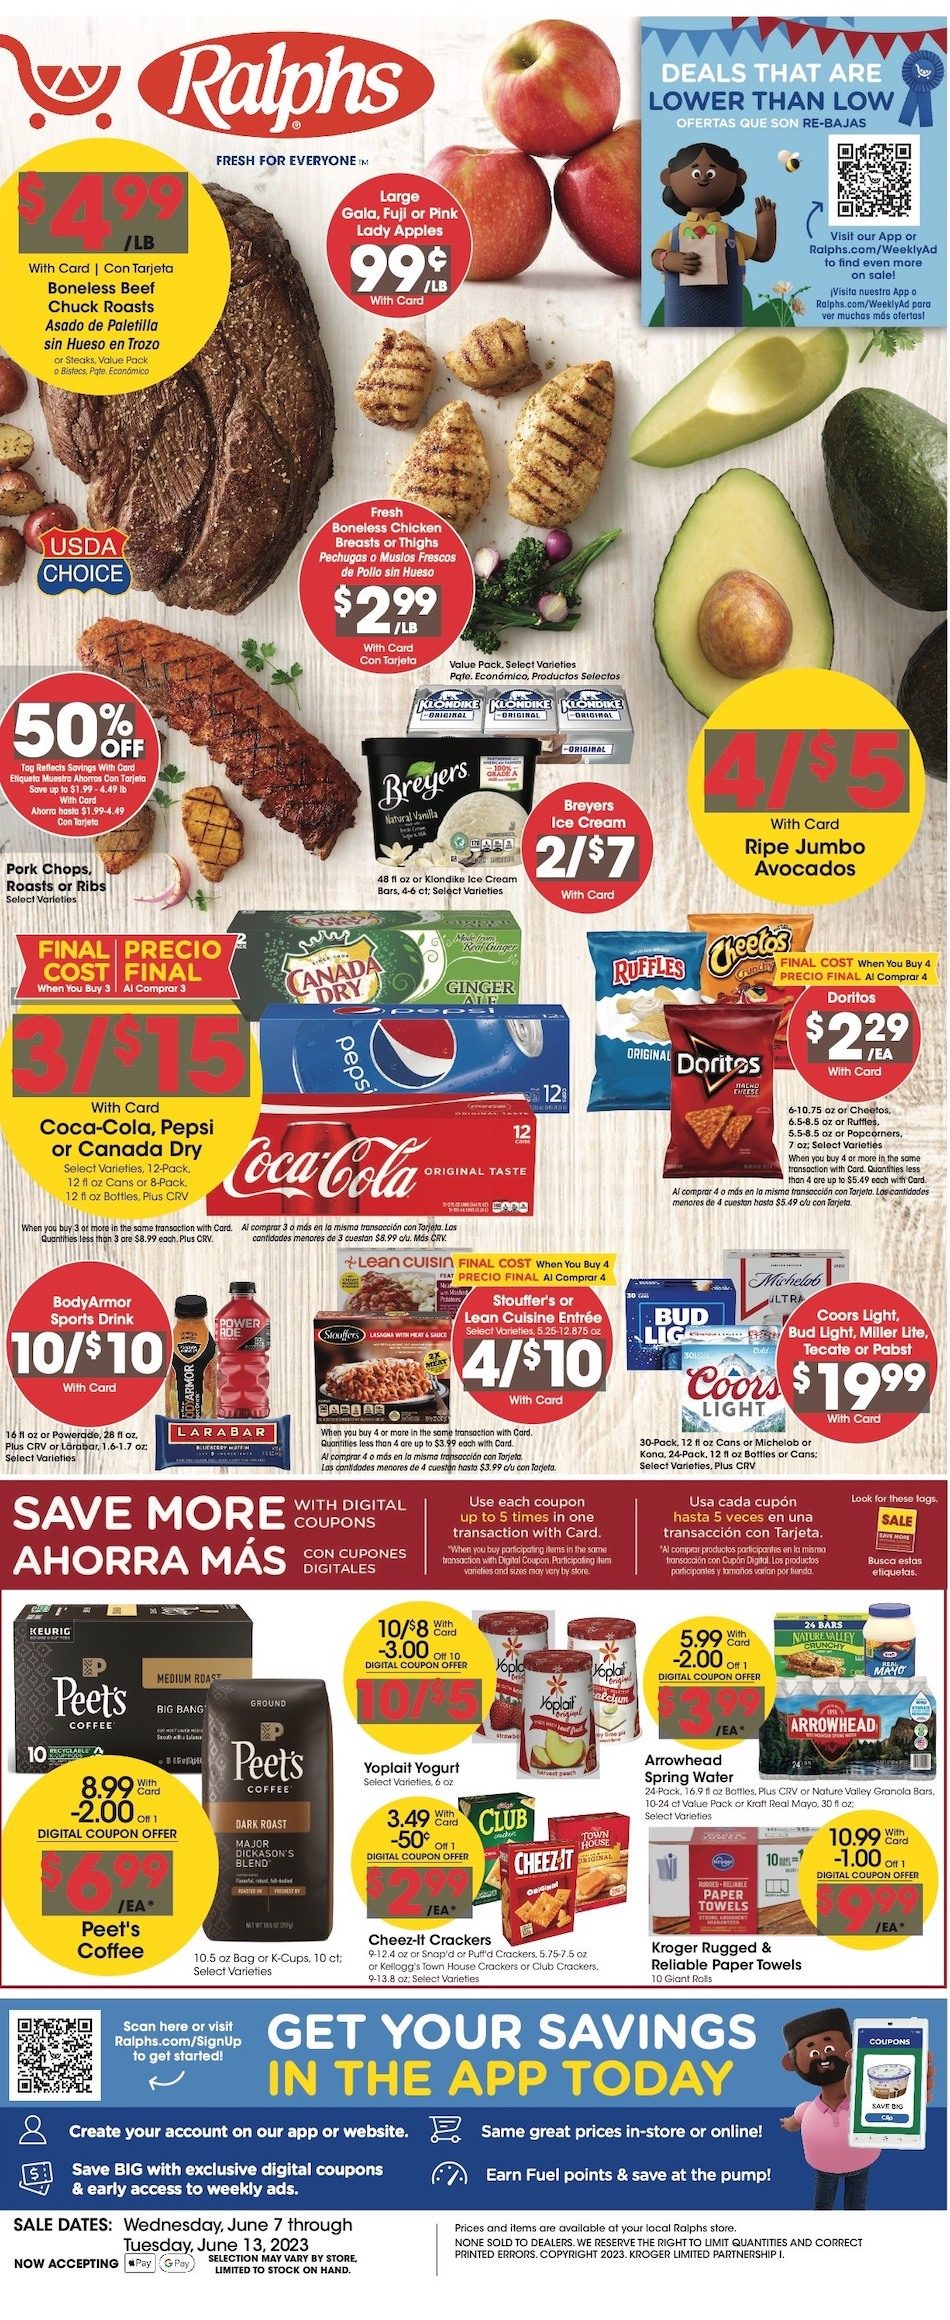 Ralphs Weekly Ad 7th – 13th June 2023 Page 1